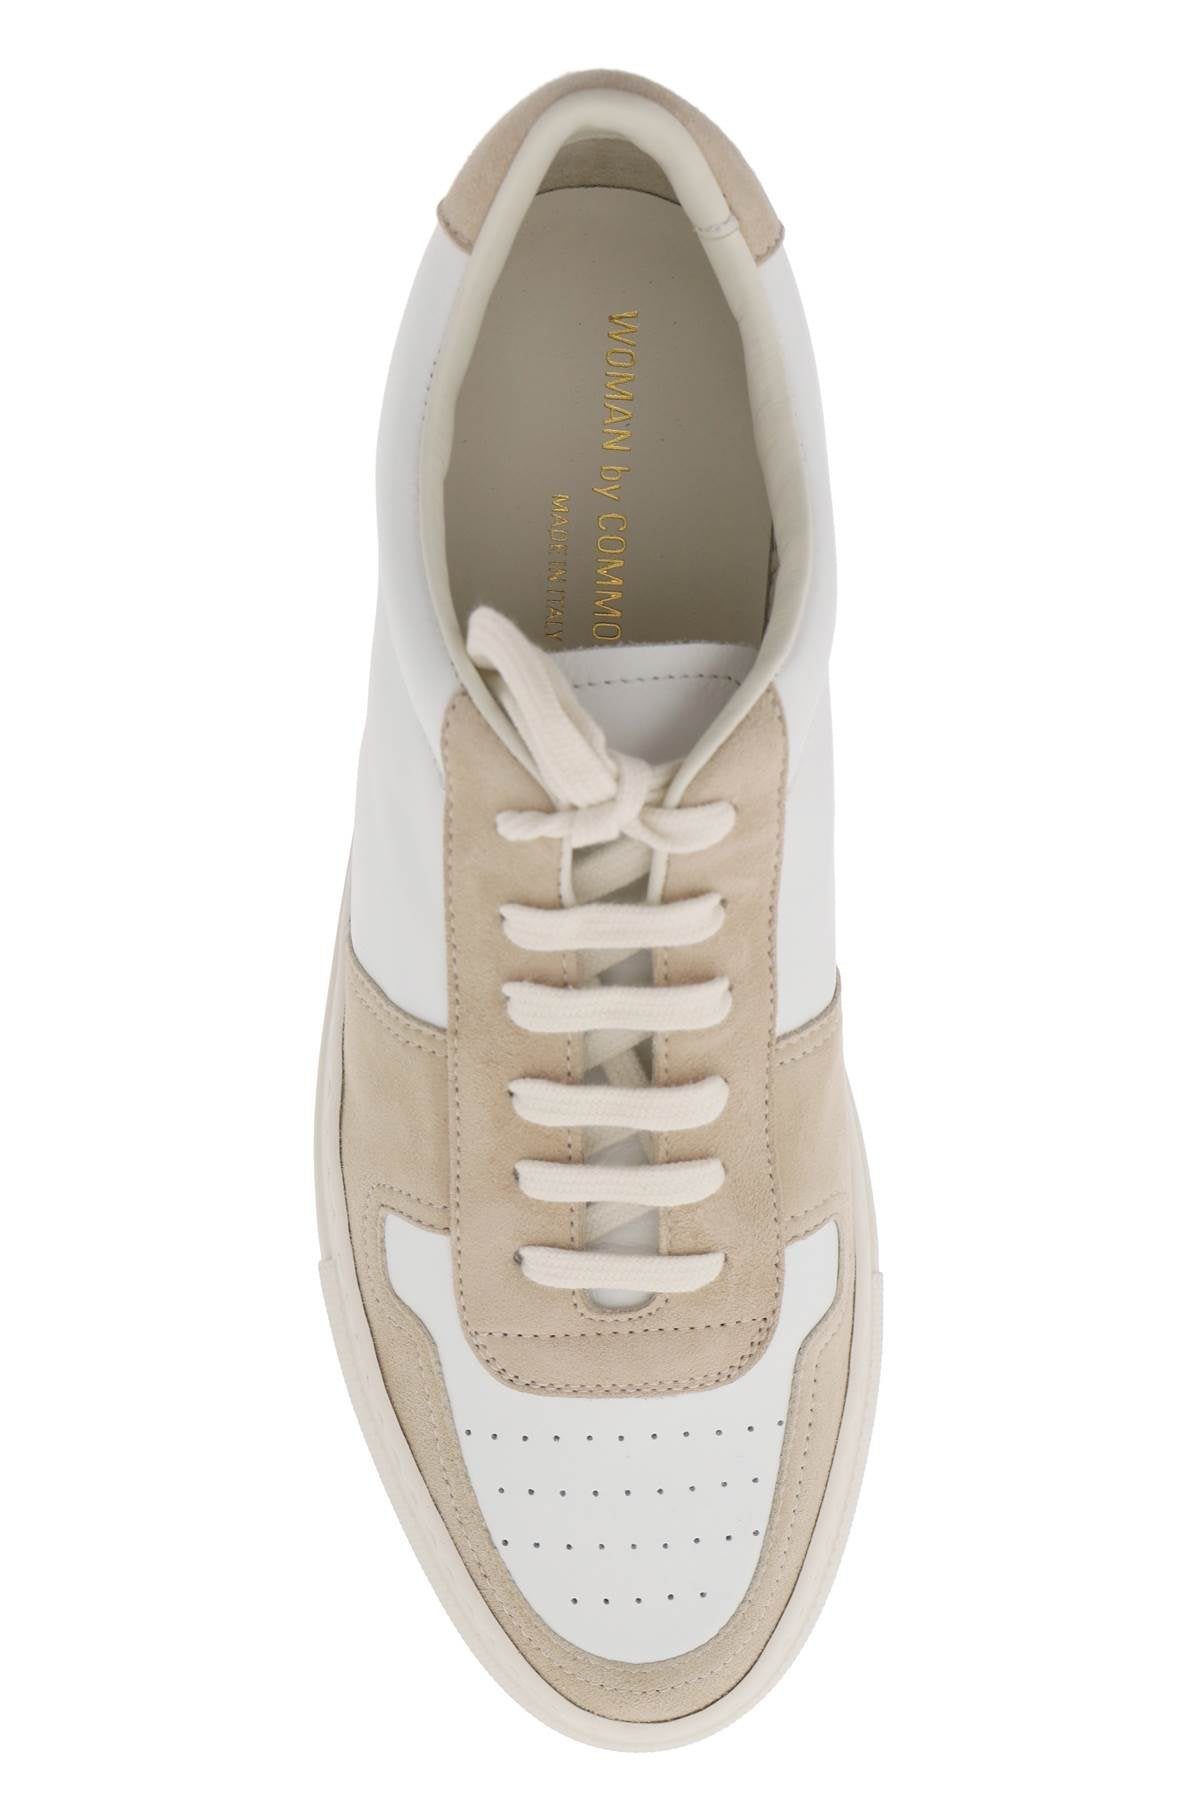 Common projects basketball sneaker-1